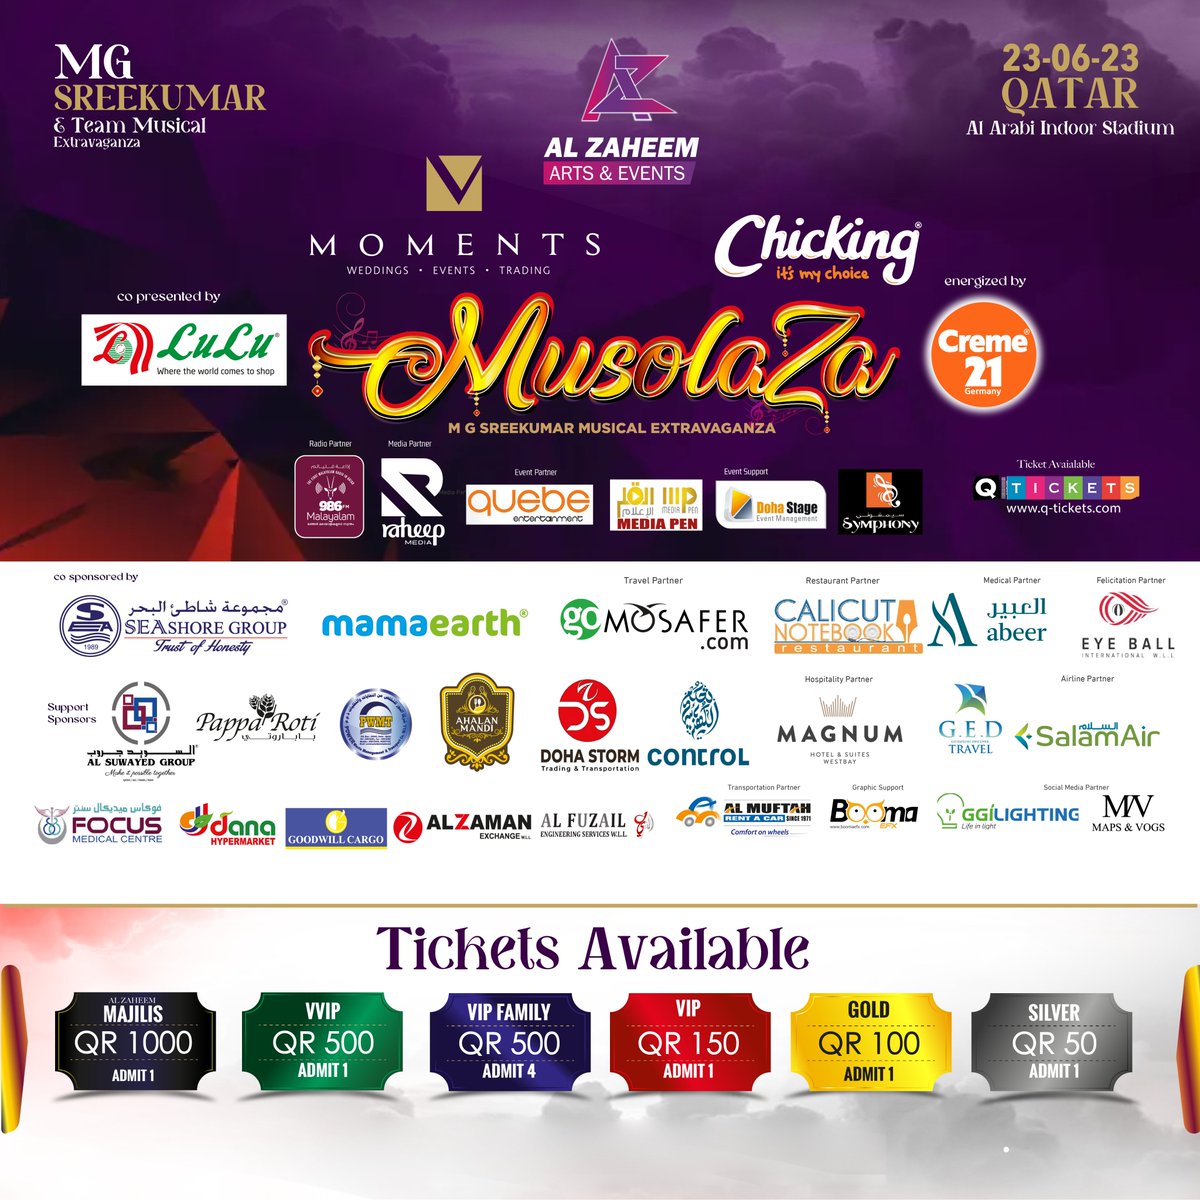 MG SREEKUMAR along with an incredible lineup of singers from Mollywood will perform live in Qatar on June 23 at Al Arabi Sports Club.

Bookings & Details at q-tickets.com

#Musolaza #MalayalamEvent #ConcertsQatar #LiveConcertQatar #MollywoodSingers #QTickets